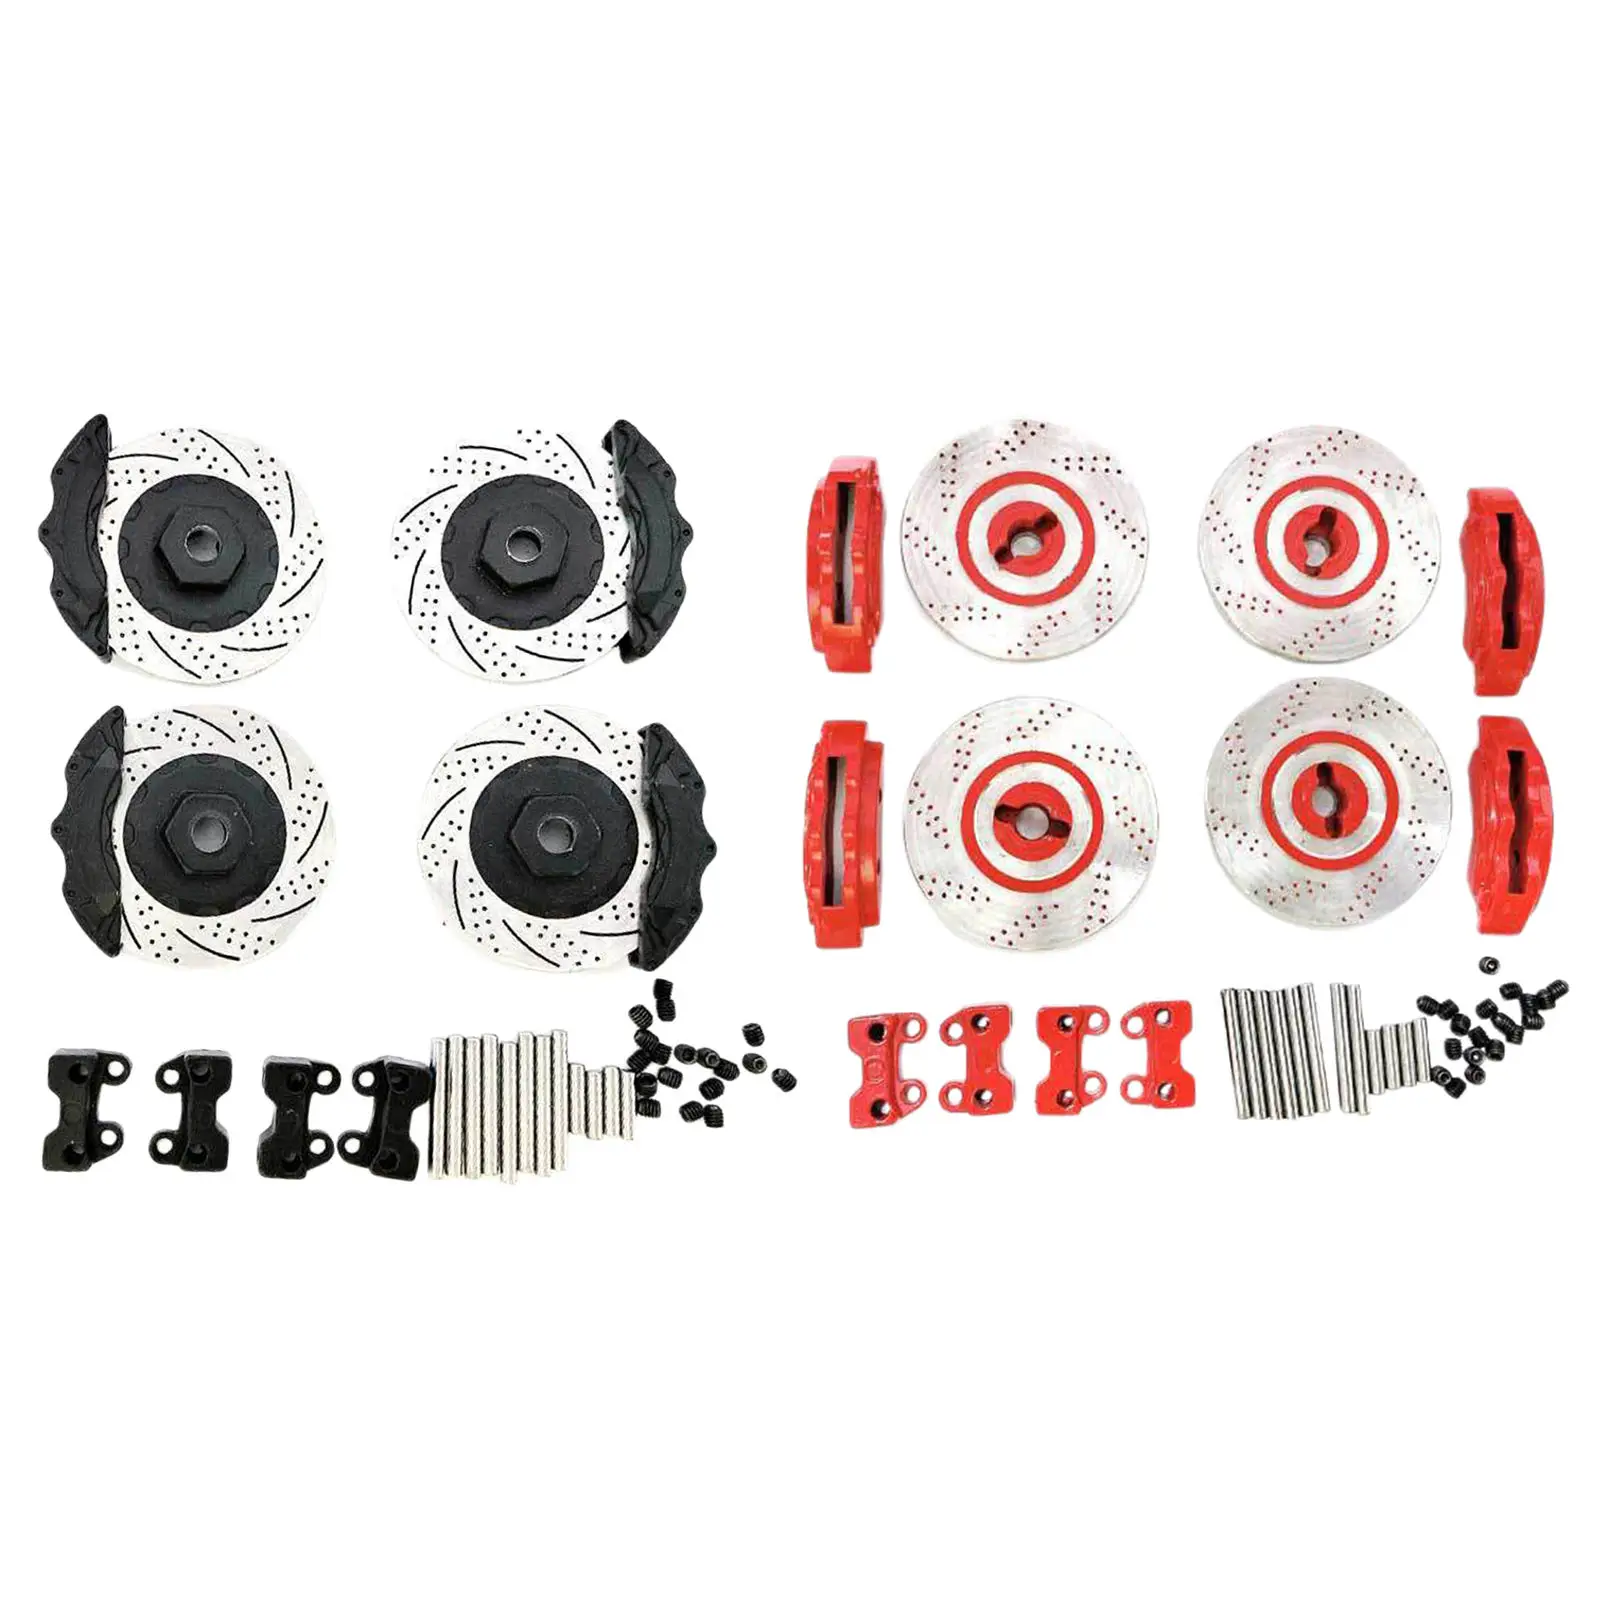 Ford Kit Mercedes Big G DIY Accessories 4 Pieces Modified Simulation Brake Disc Calipers For Climbing Car TRX4/6 brake disc